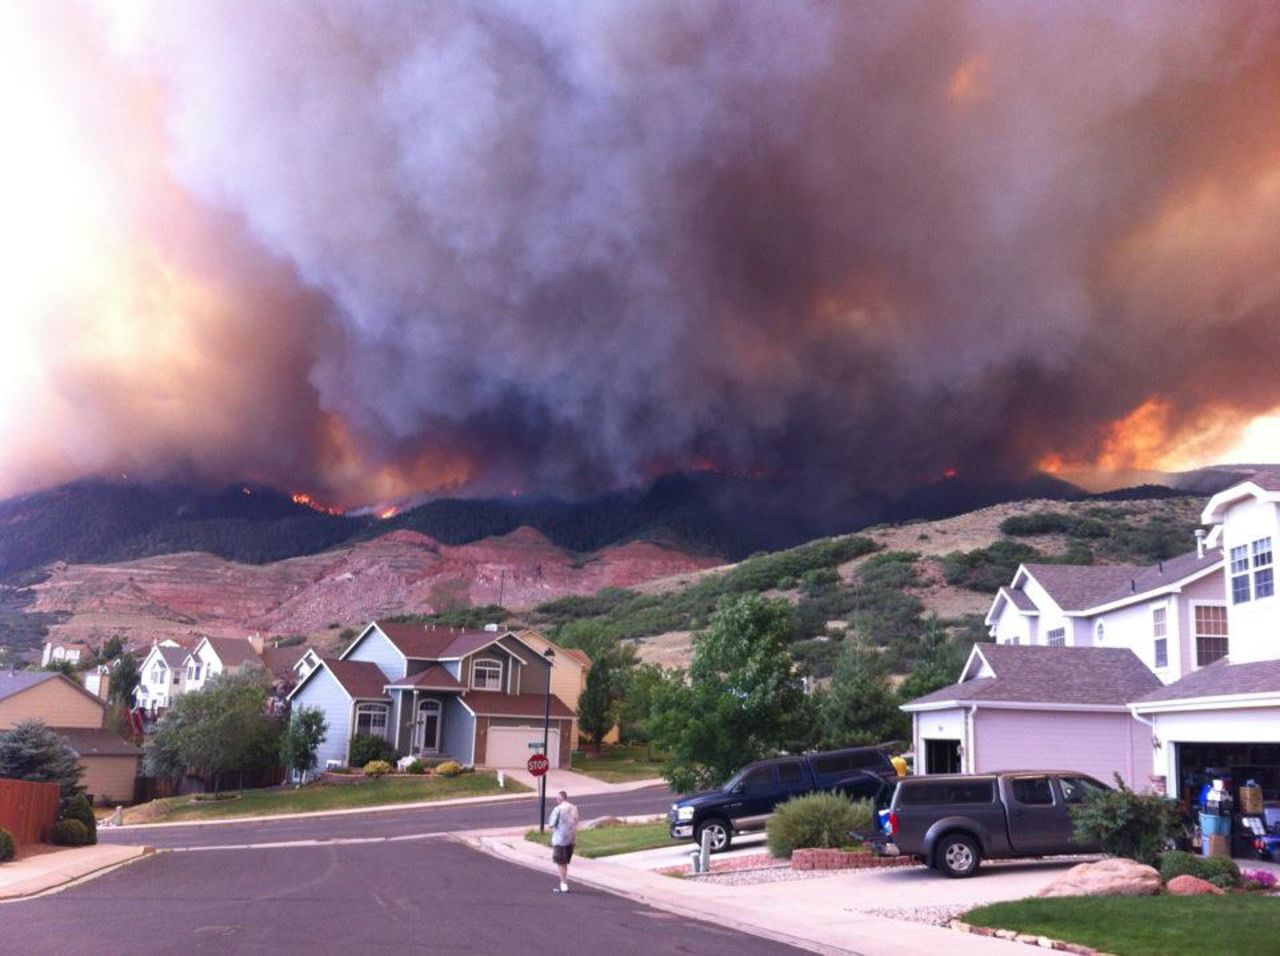 Wildfires burning in the foothills of the <a href="http://ireport.cnn.com/docs/DOC-807852">Colorado Springs mountains </a>blanketed a nearby neighborhood with pitch-black smoke in June. "We ran outside and saw the side of the foothills getting engulfed by flames coming down on either sides of the quarry," said photographer Michael Kennedy. "Our subdivision quickly deteriorated into a war zone with police cars coming into the neighborhood with loud speakers announcing 'leave the area, under mandatory evacuation.'"